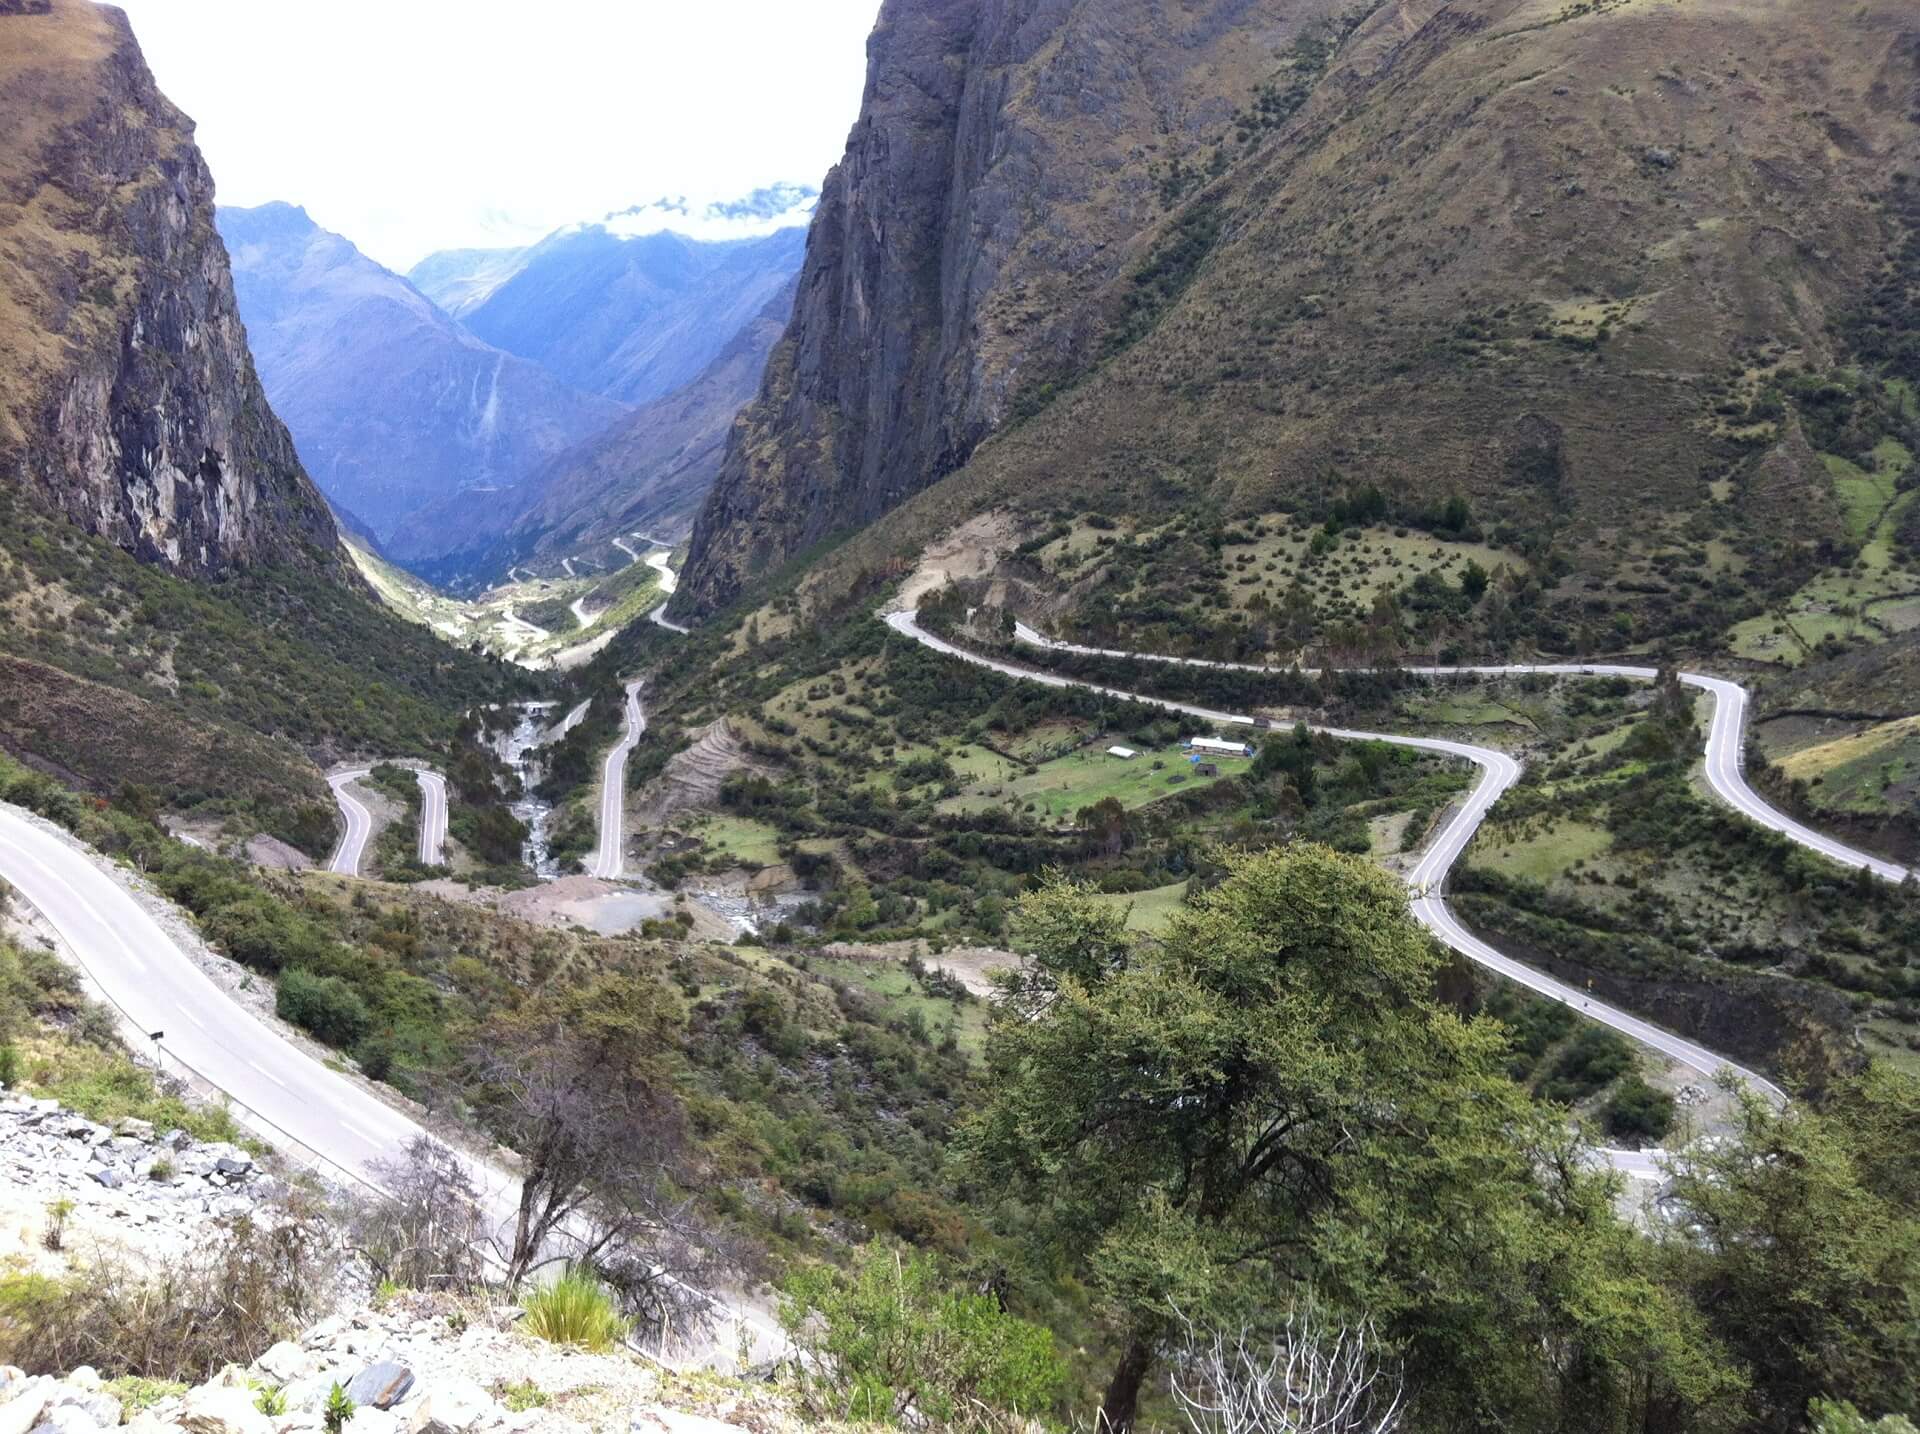 The Abra Malaga pass on the Back Door Route to Machu Picchu is also visited on the Road Trip developed by RESPONSible Travel Peru